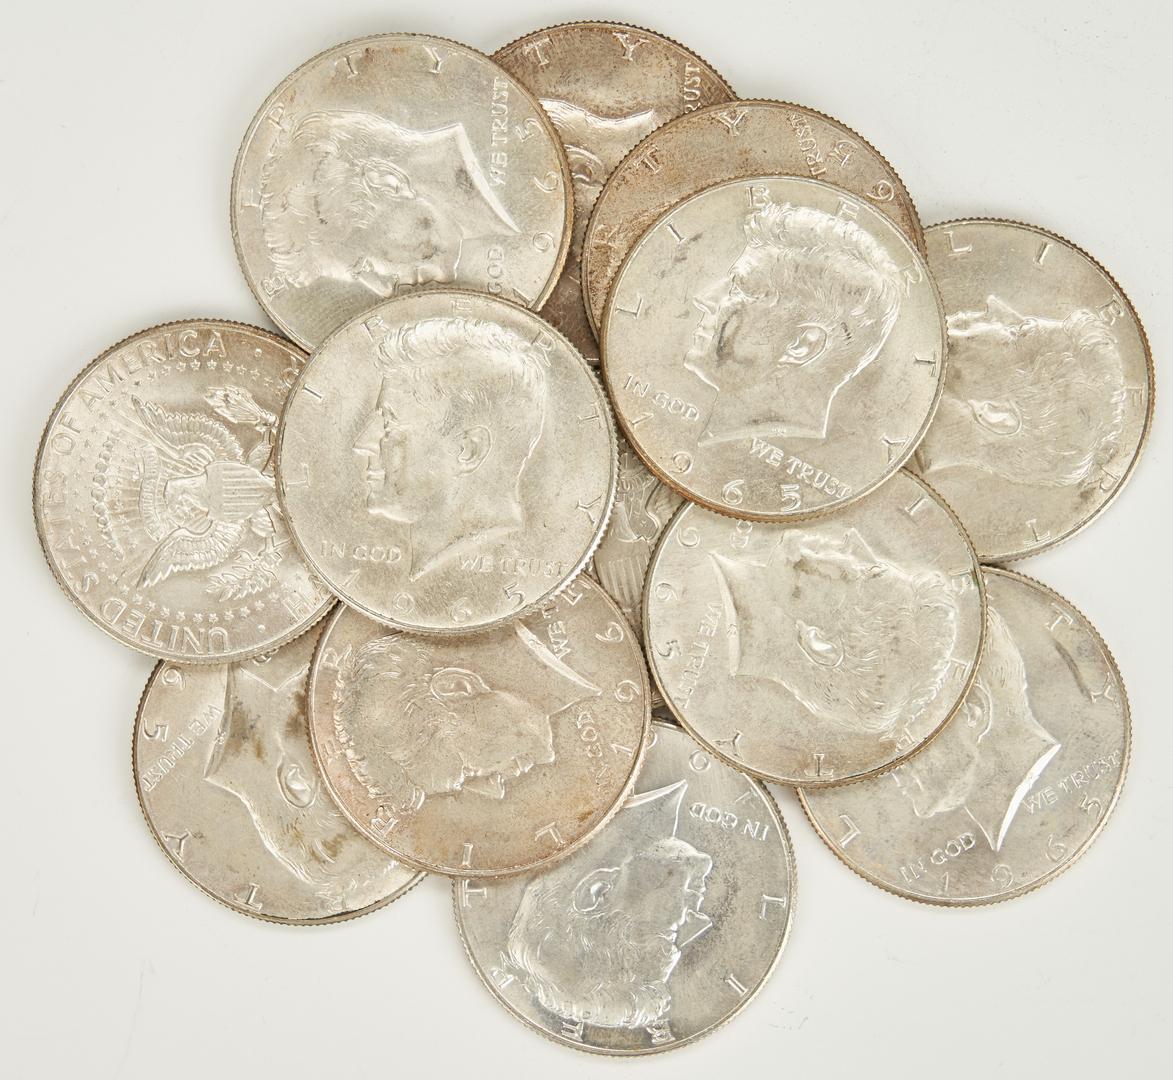 Lot 738: Silver Coin Grouping of 447 items, incl. Dimes, Quarters, and Halves